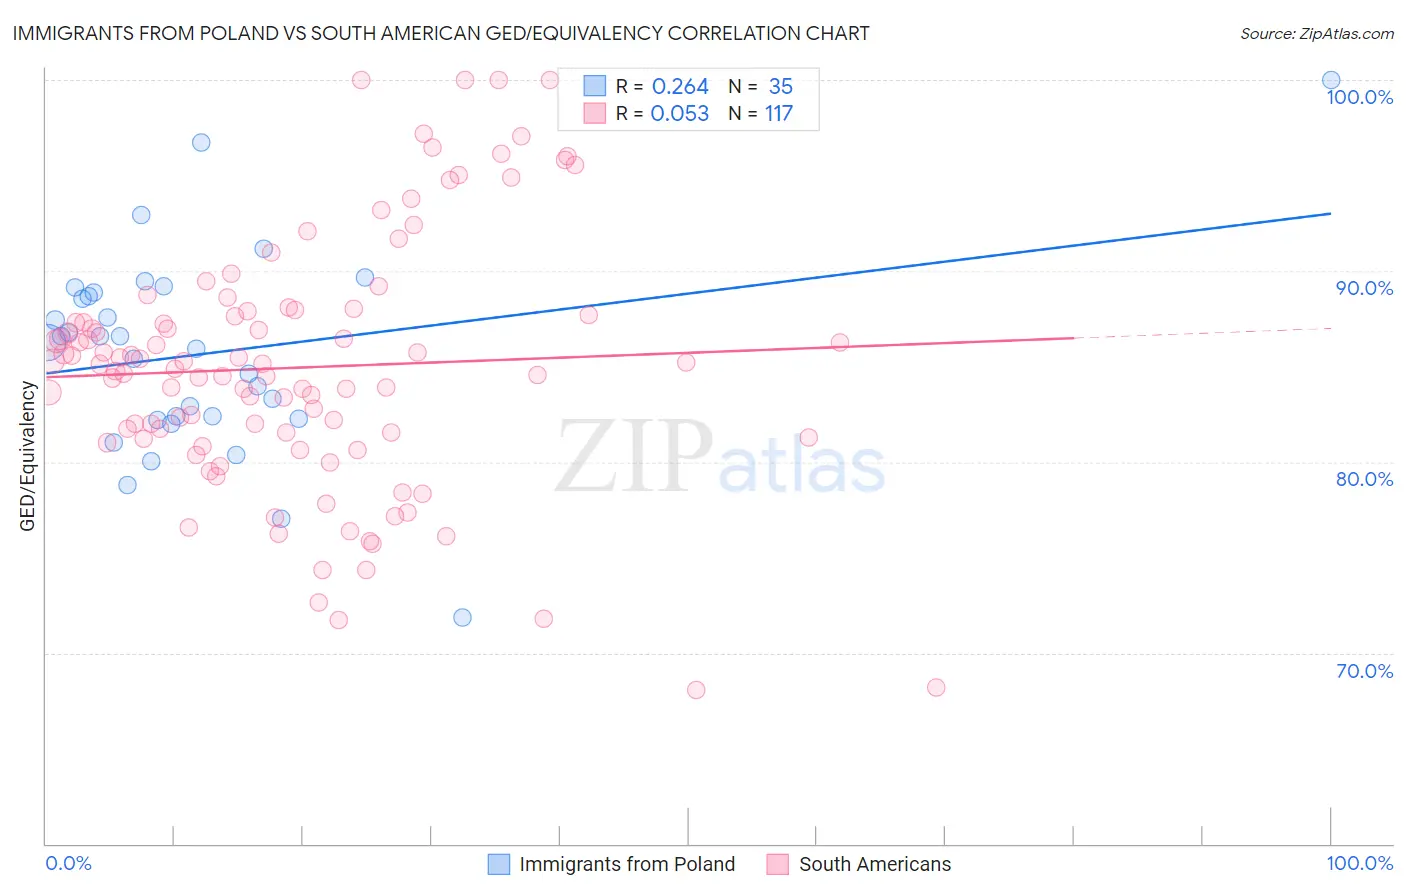 Immigrants from Poland vs South American GED/Equivalency